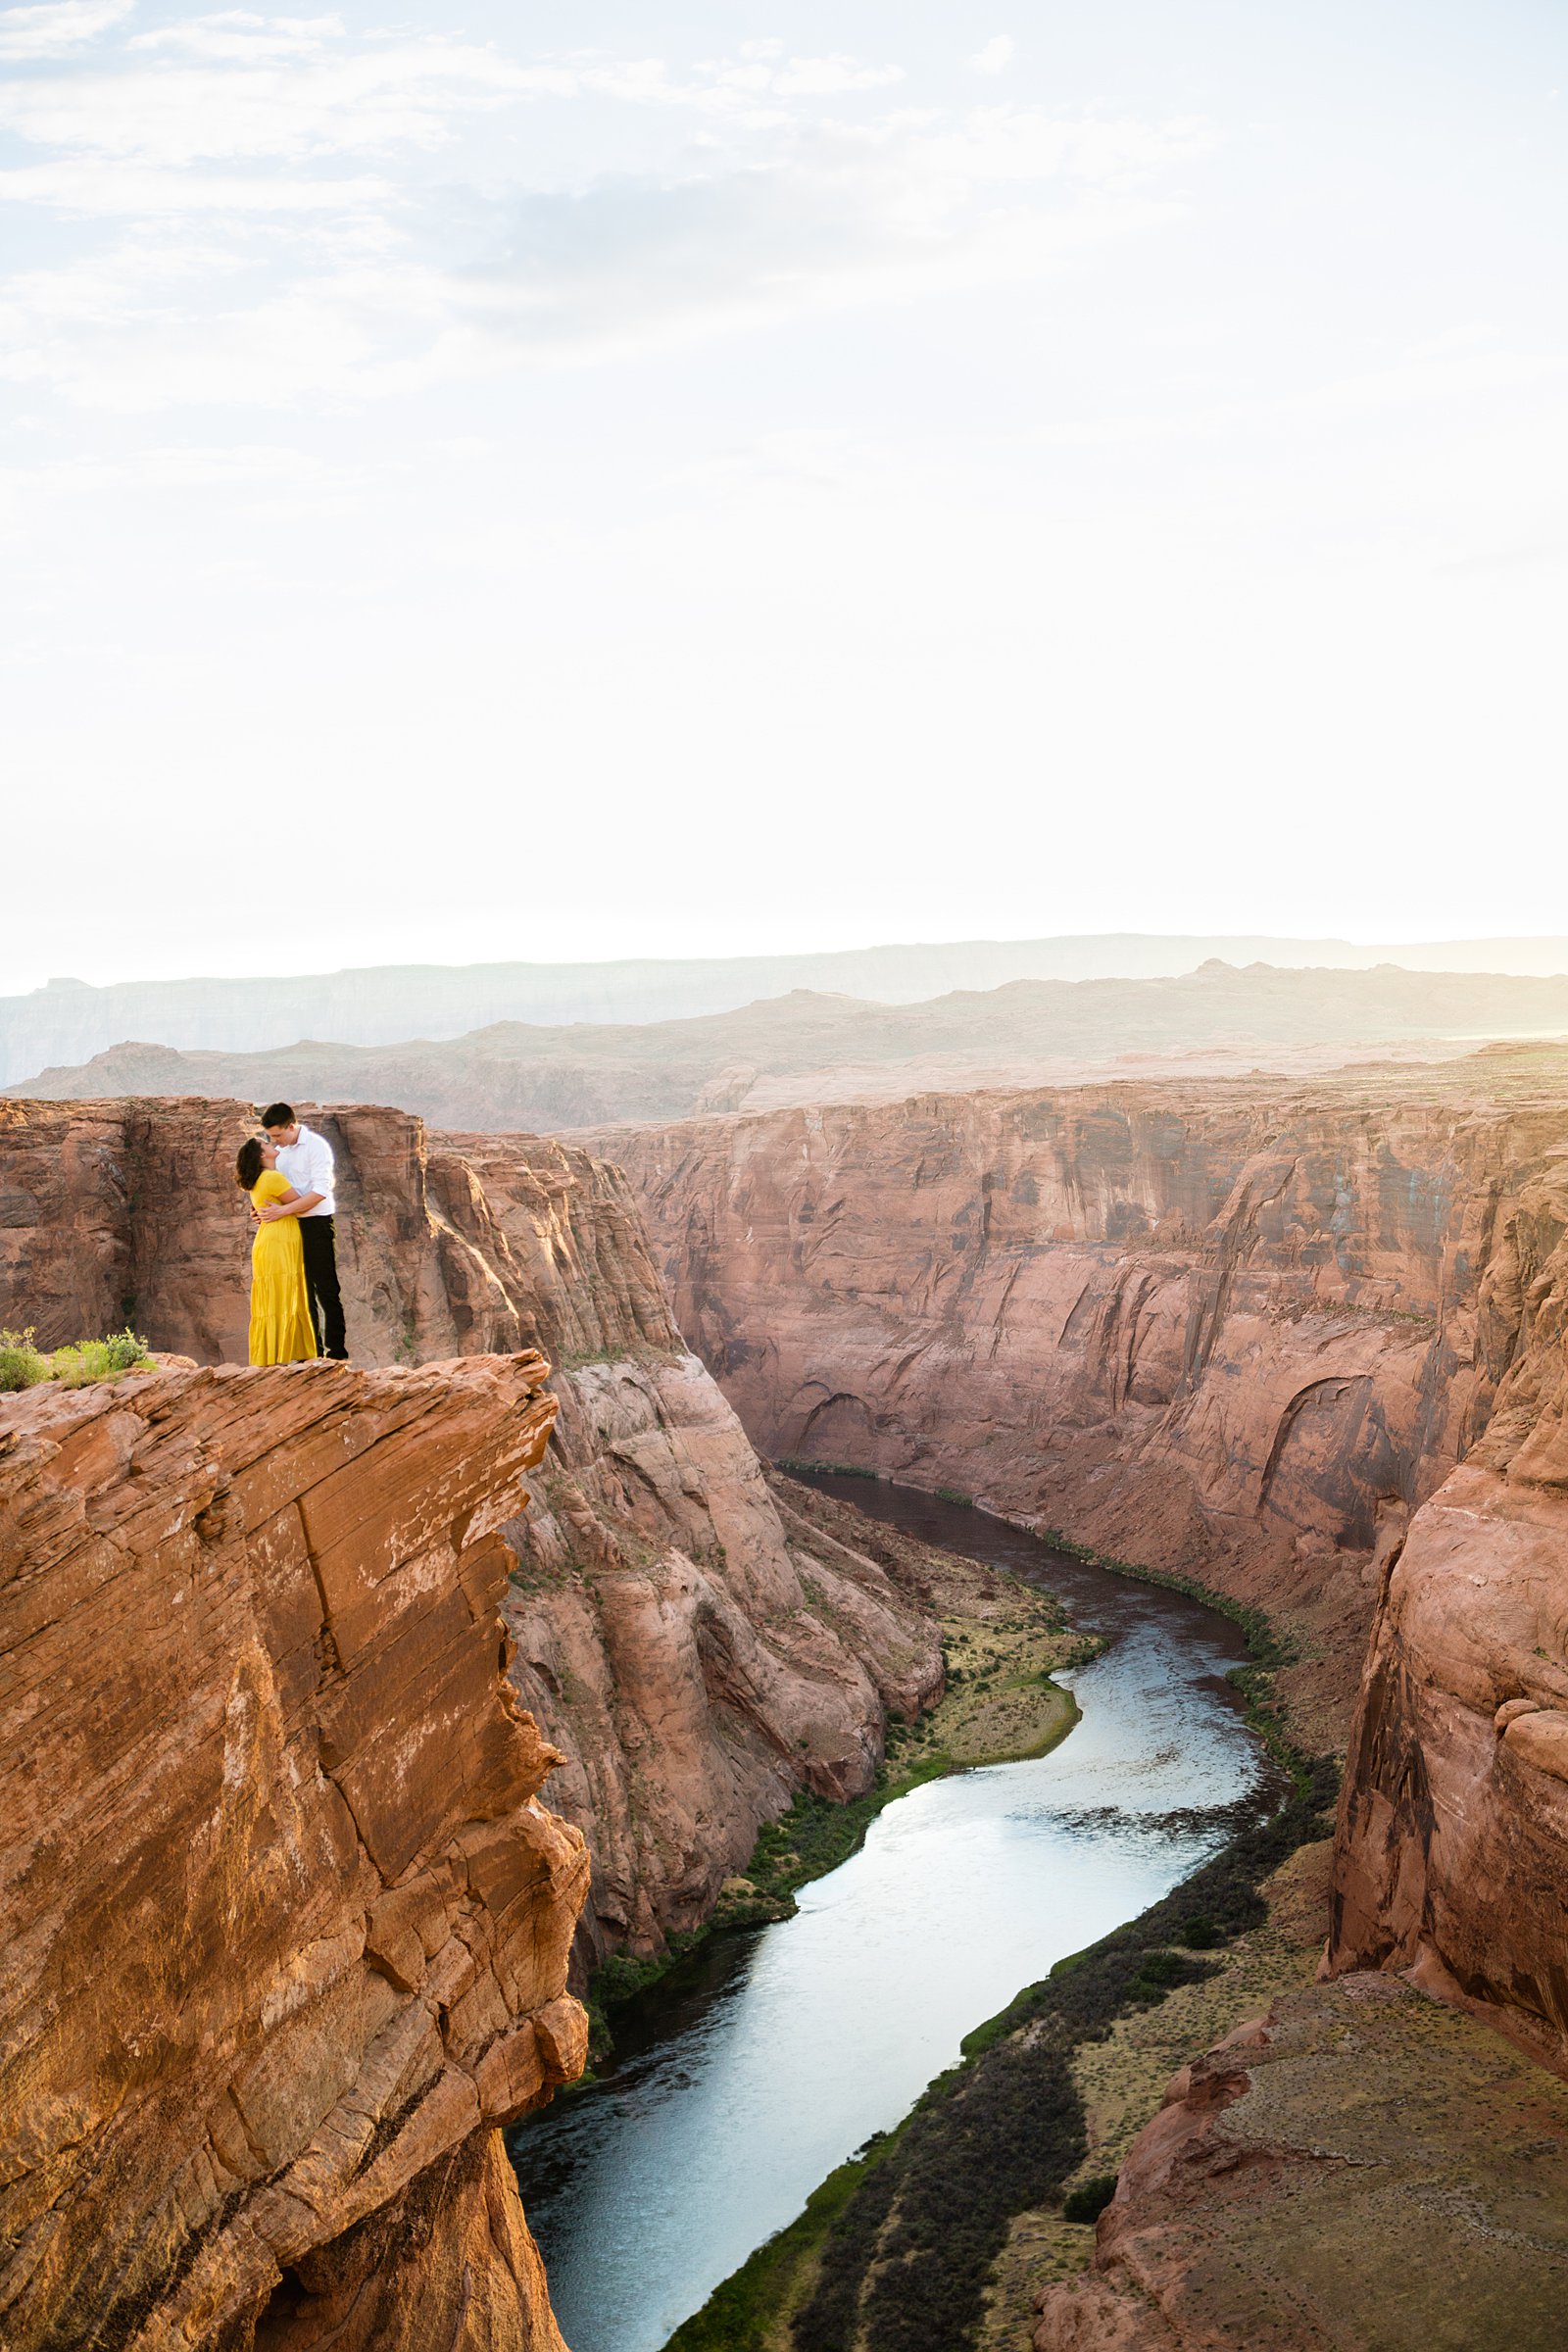 Couple share a kiss during their Horshoe Bend engagement session by Page wedding photographer PMA Photography.